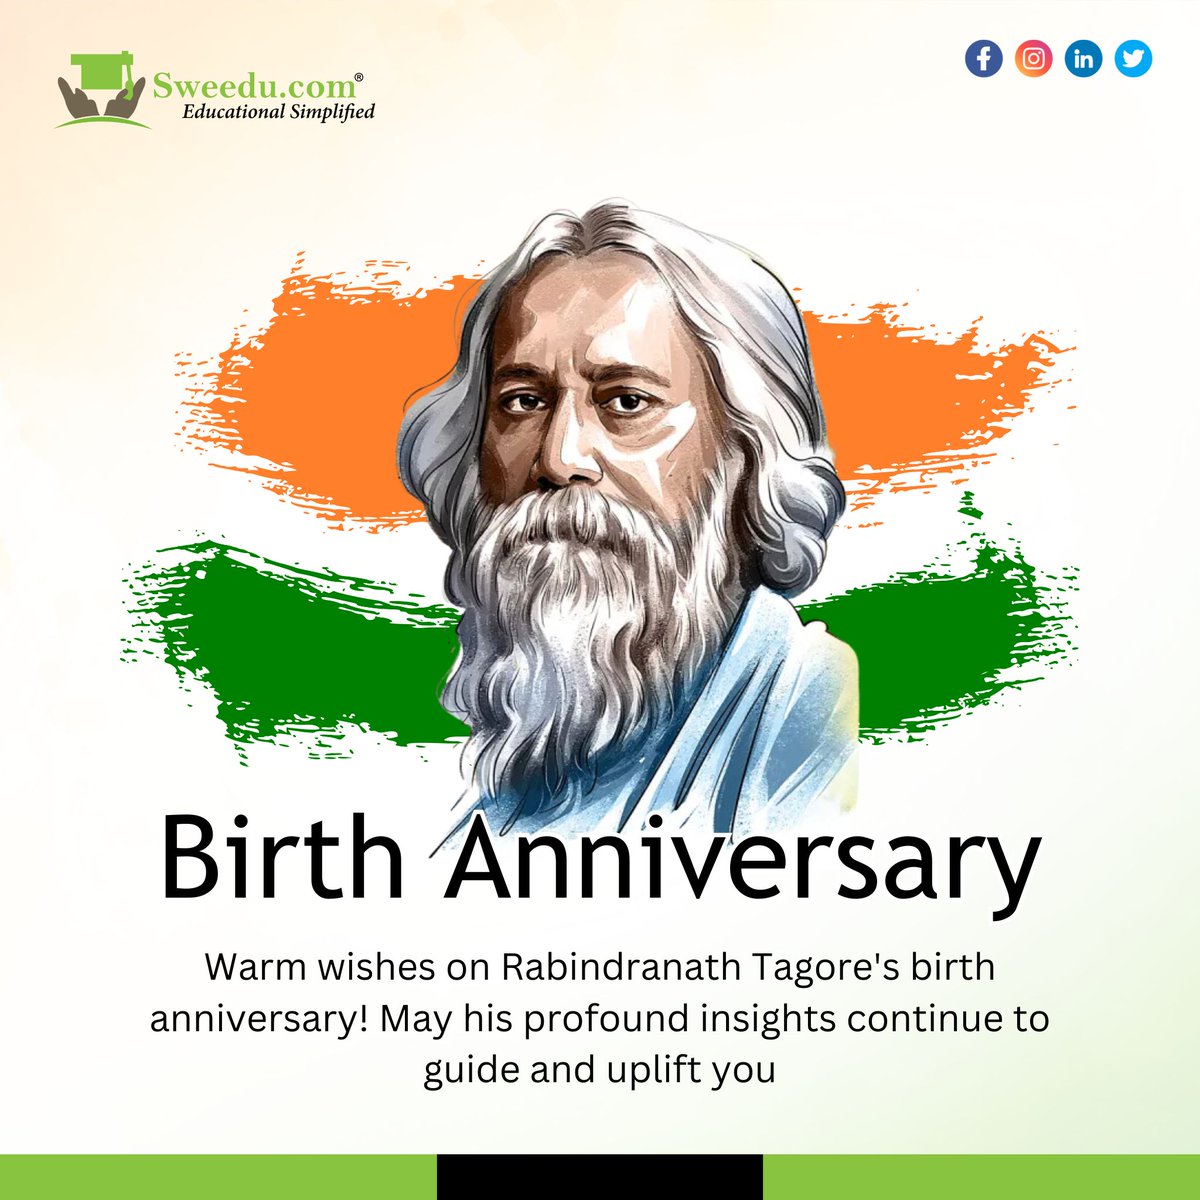 Celebrating the birth anniversary of the legendary #RabindranathTagore. His profound insights continue to guide and uplift us. Warm wishes to all on this special day.

#TagoreJayanti #LiteraryGenius #Wisdom #Inspiration #BengalBard #TagorePoetry